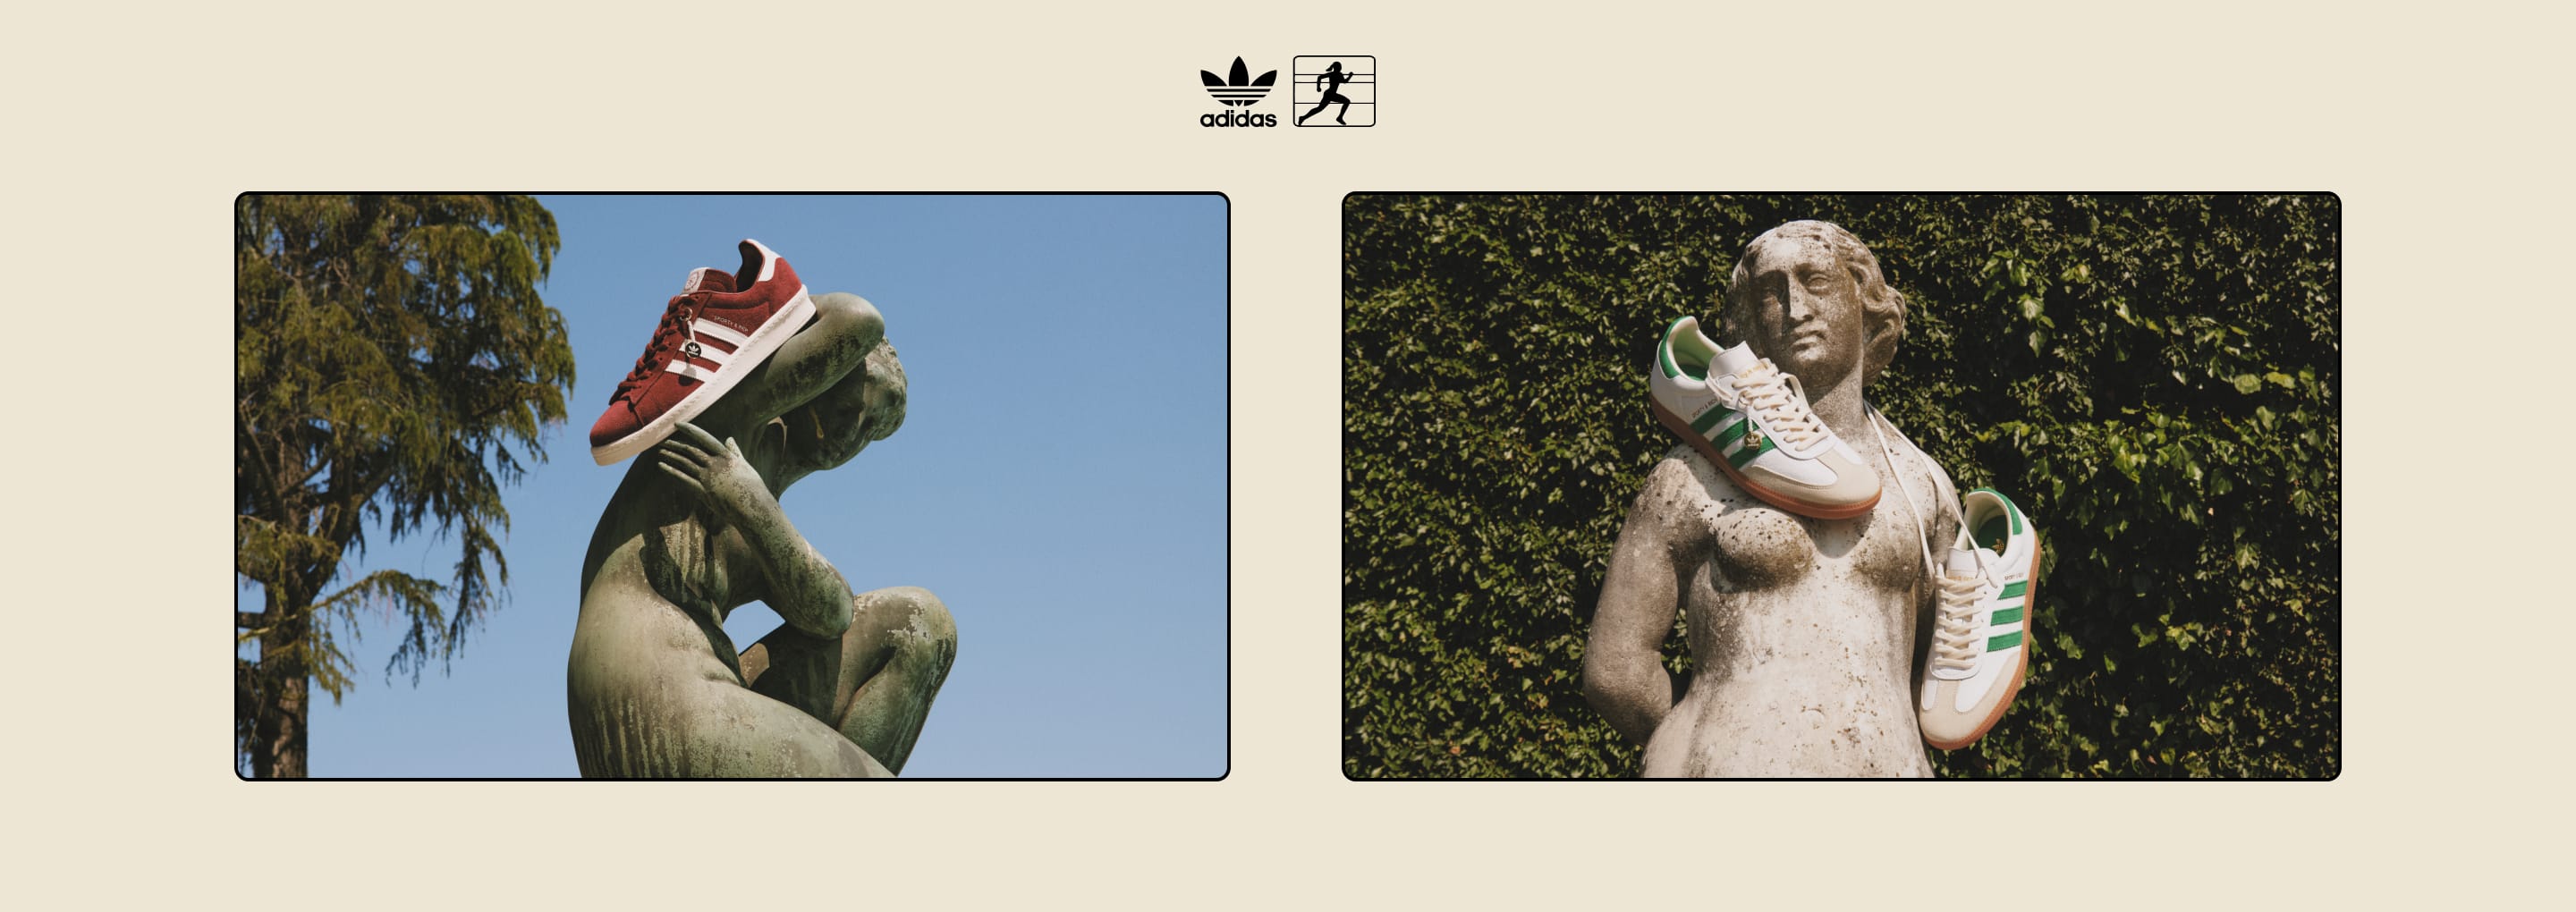 The adidas X Sporty & Rich Samba OG and Campus 80s hanging from two statues surrounded by nature.